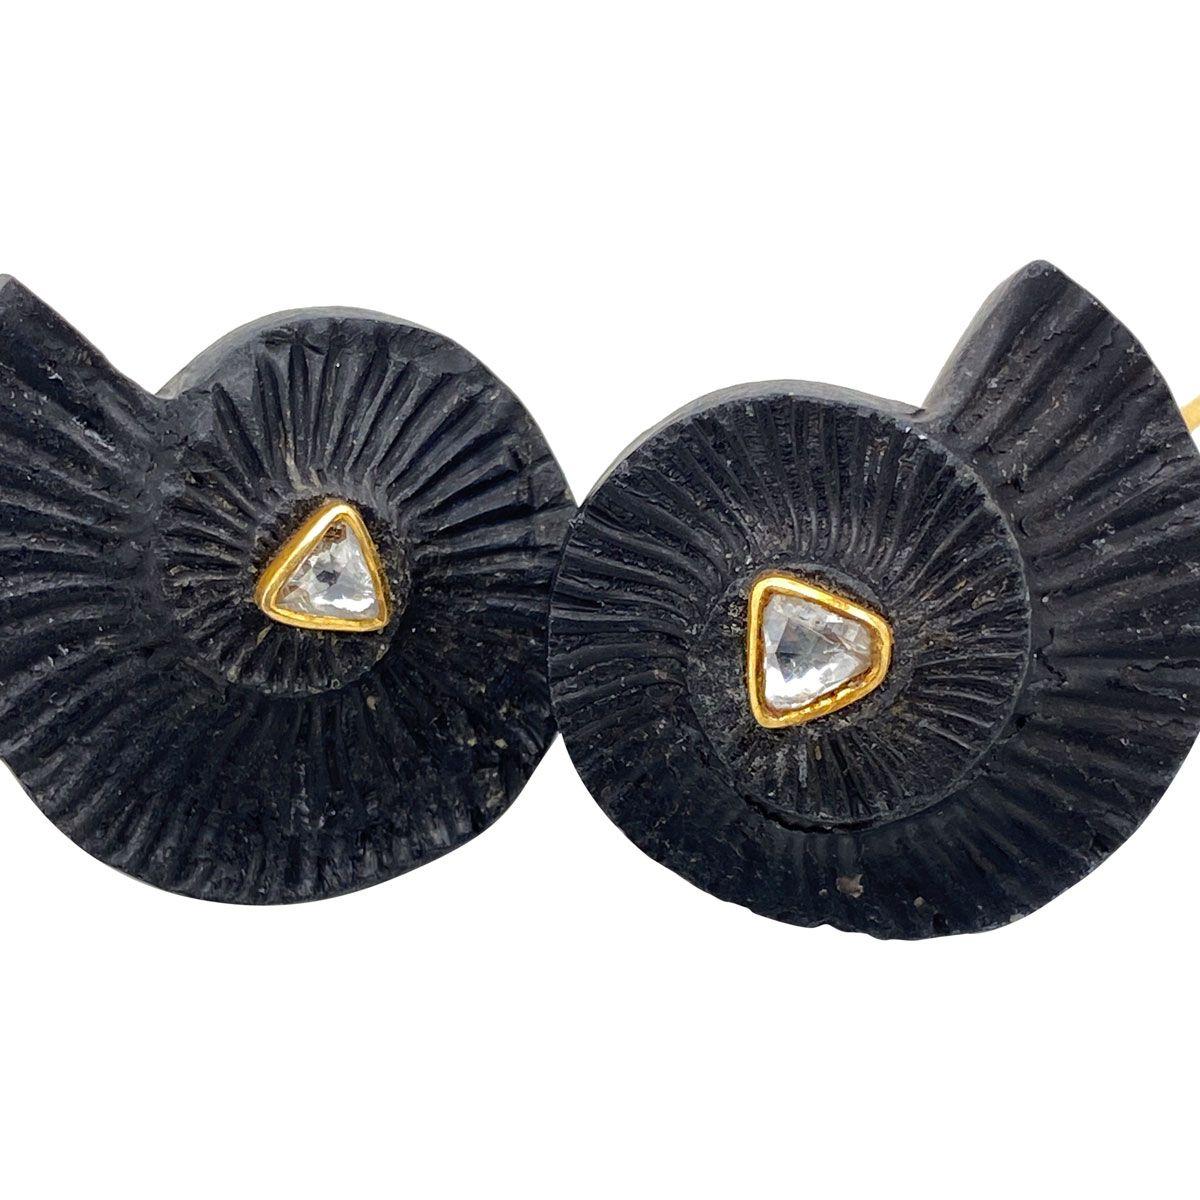 Unique creations made from three elements of the earth, diamonds, lava and gold. Beautifully crafted with such style and sophistication, you will be the only one with earrings like this. The lava stone is molded into the shape of circular conical